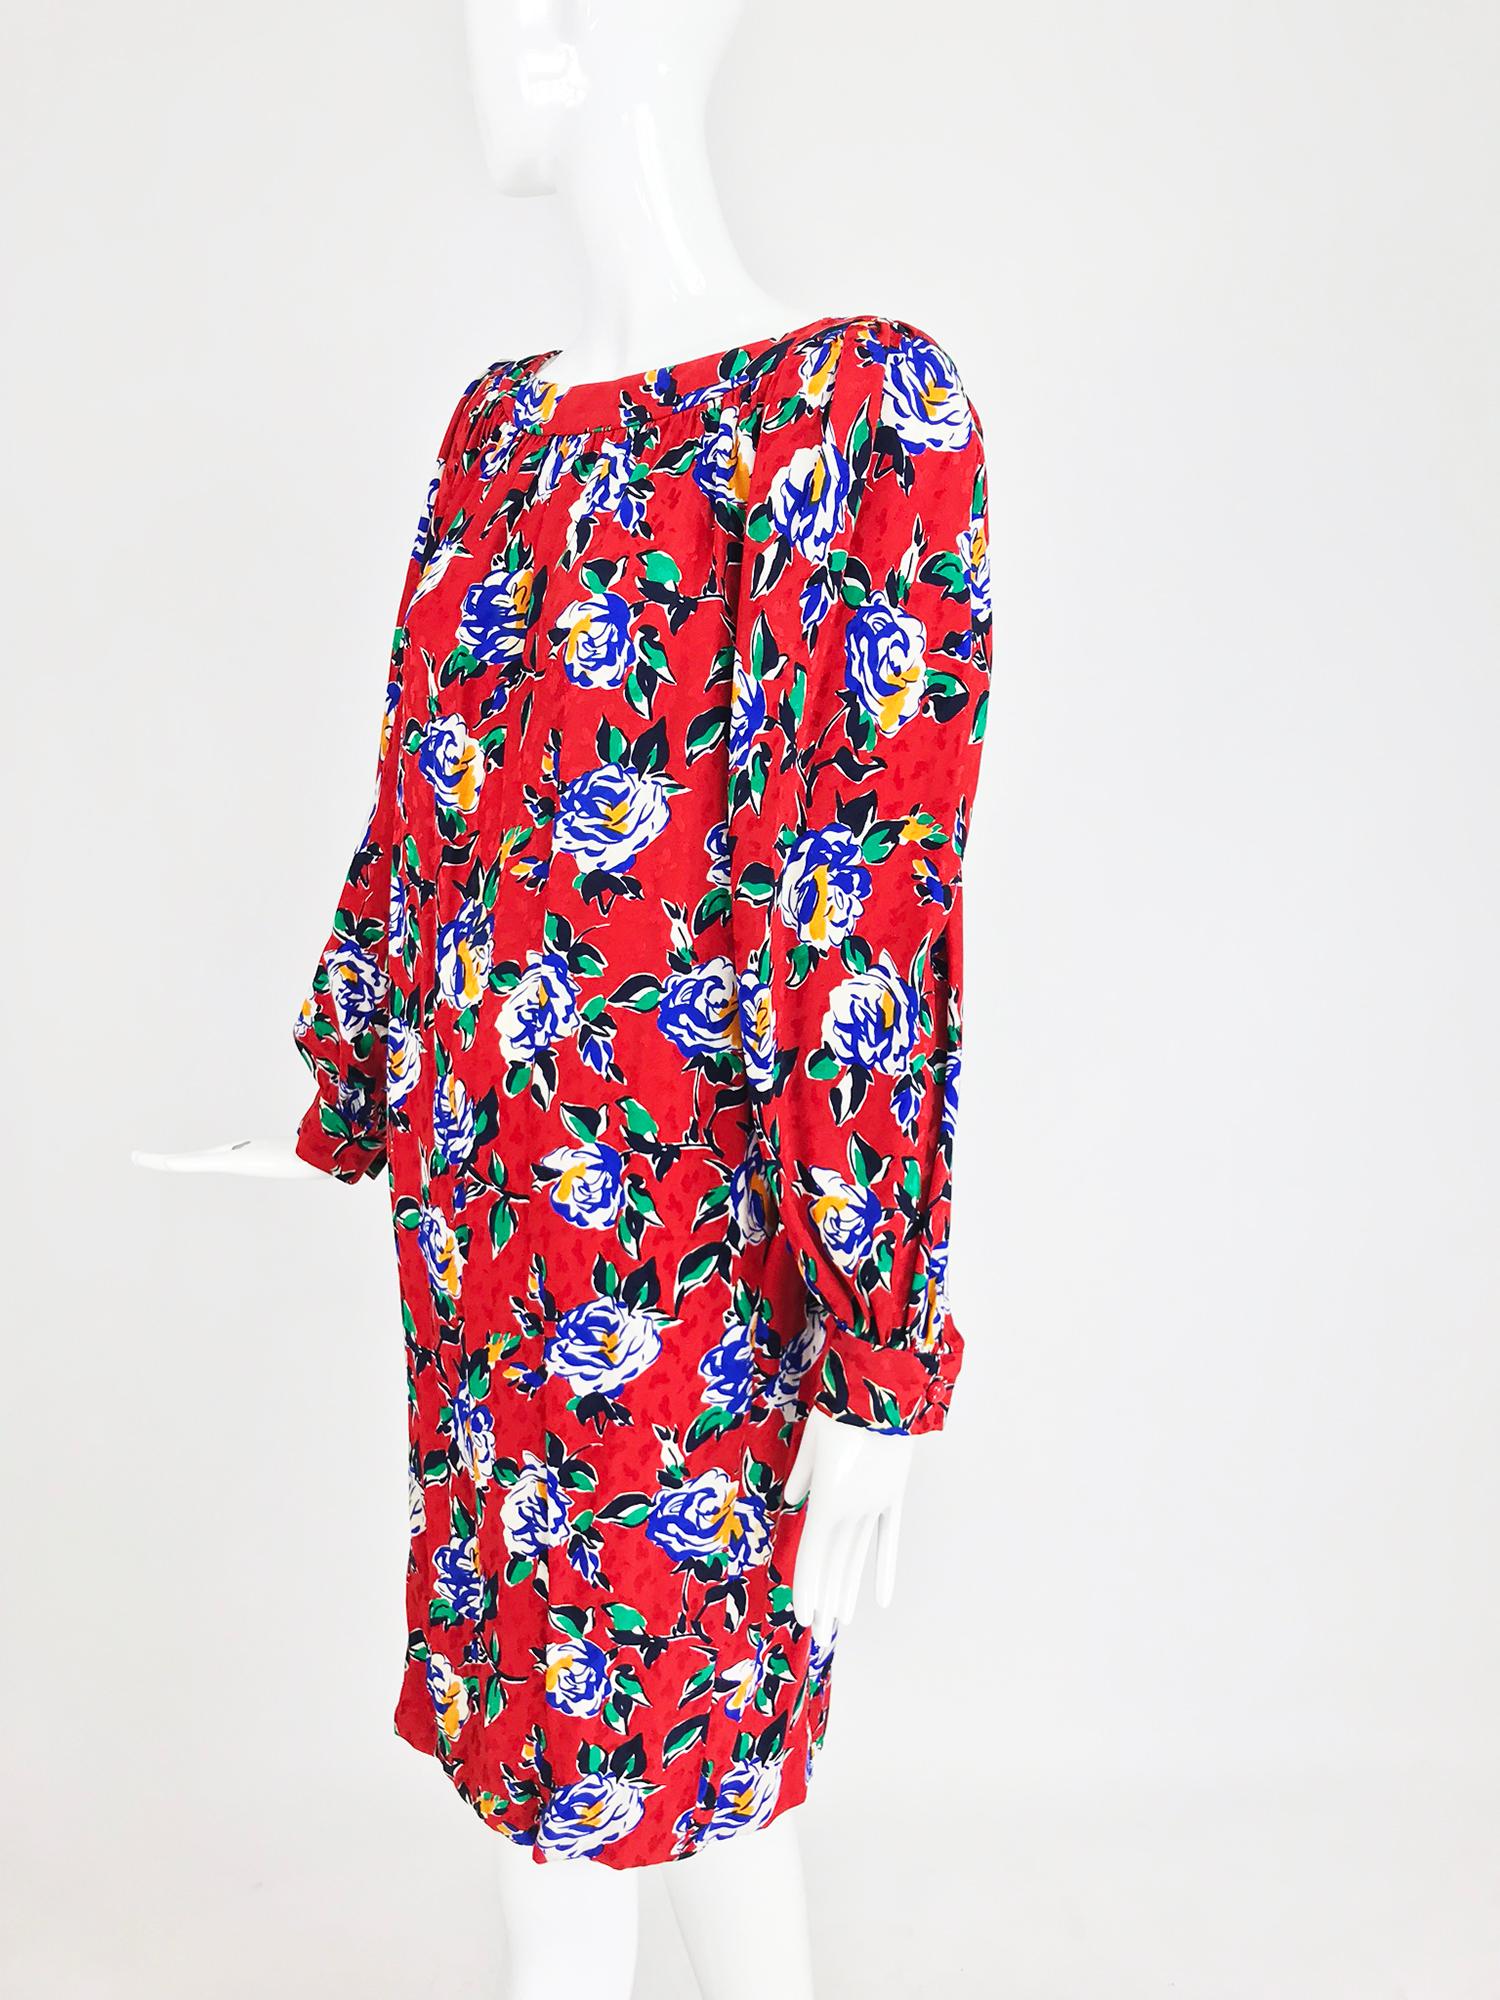 Yves Saint Laurent Red Floral Silk Jacquard Scoop Neck Dress 1990s In Good Condition In West Palm Beach, FL